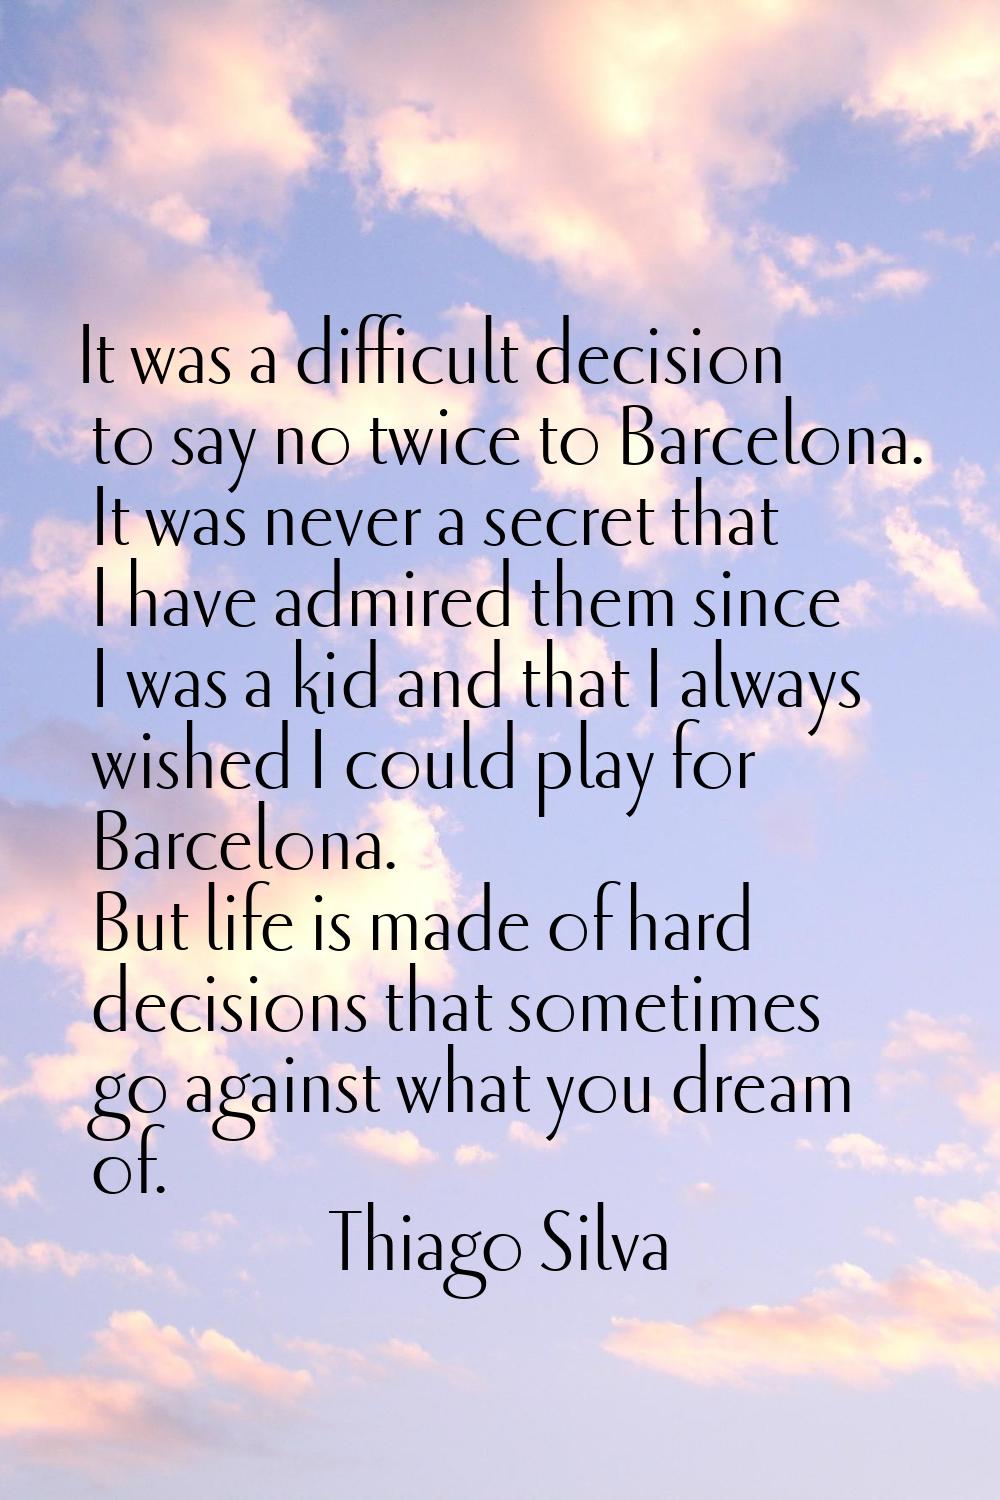 It was a difficult decision to say no twice to Barcelona. It was never a secret that I have admired